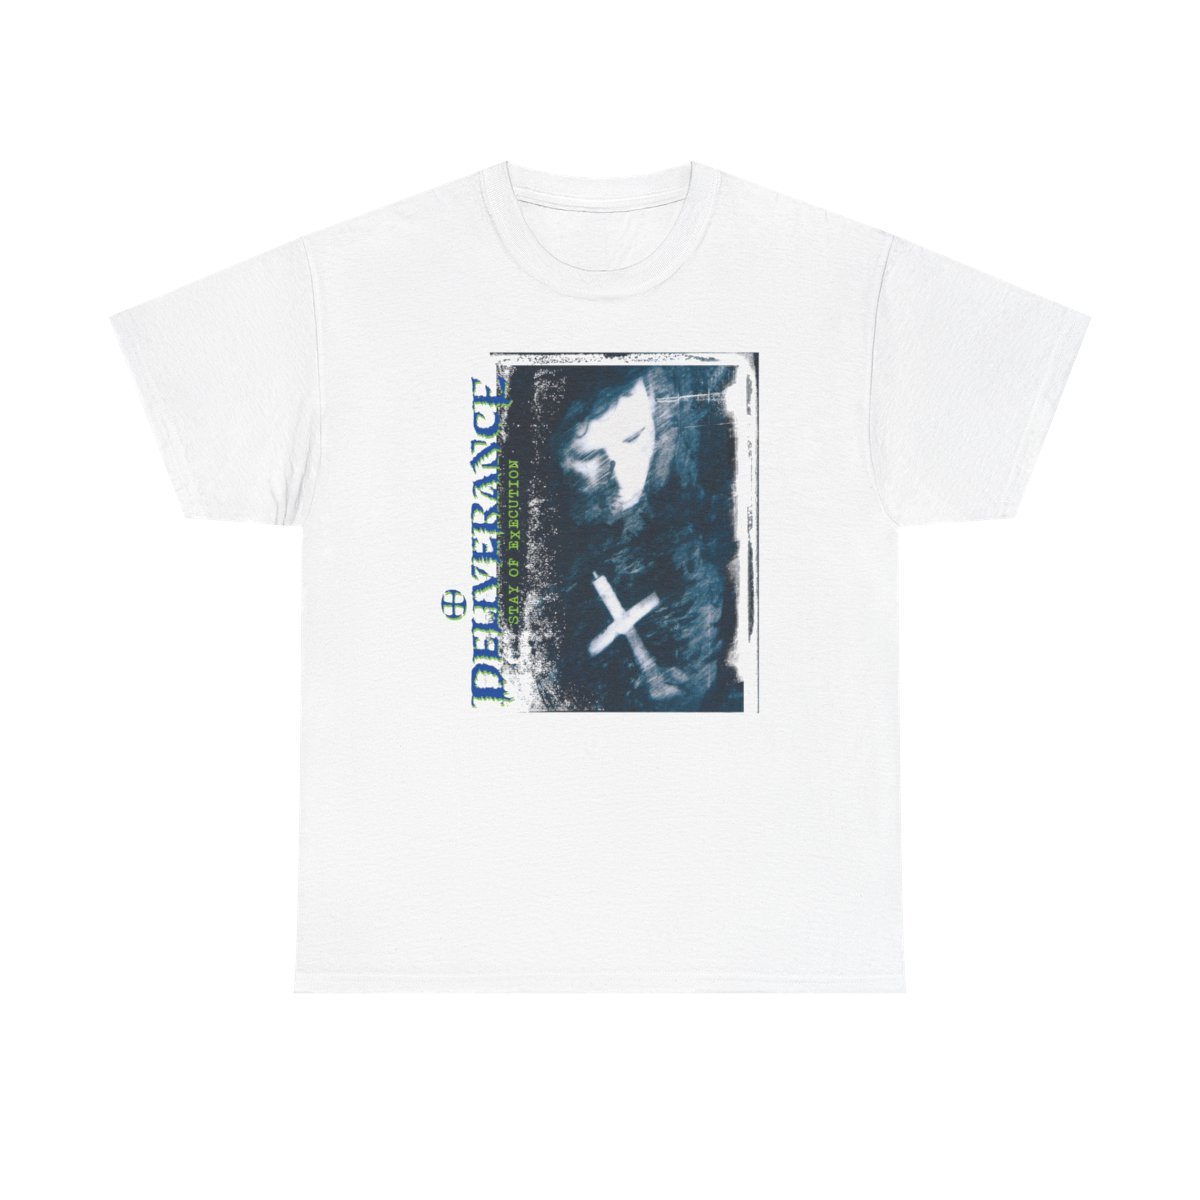 Deliverance – Stay of Execution (Light Shirt) Short Sleeve Tshirt